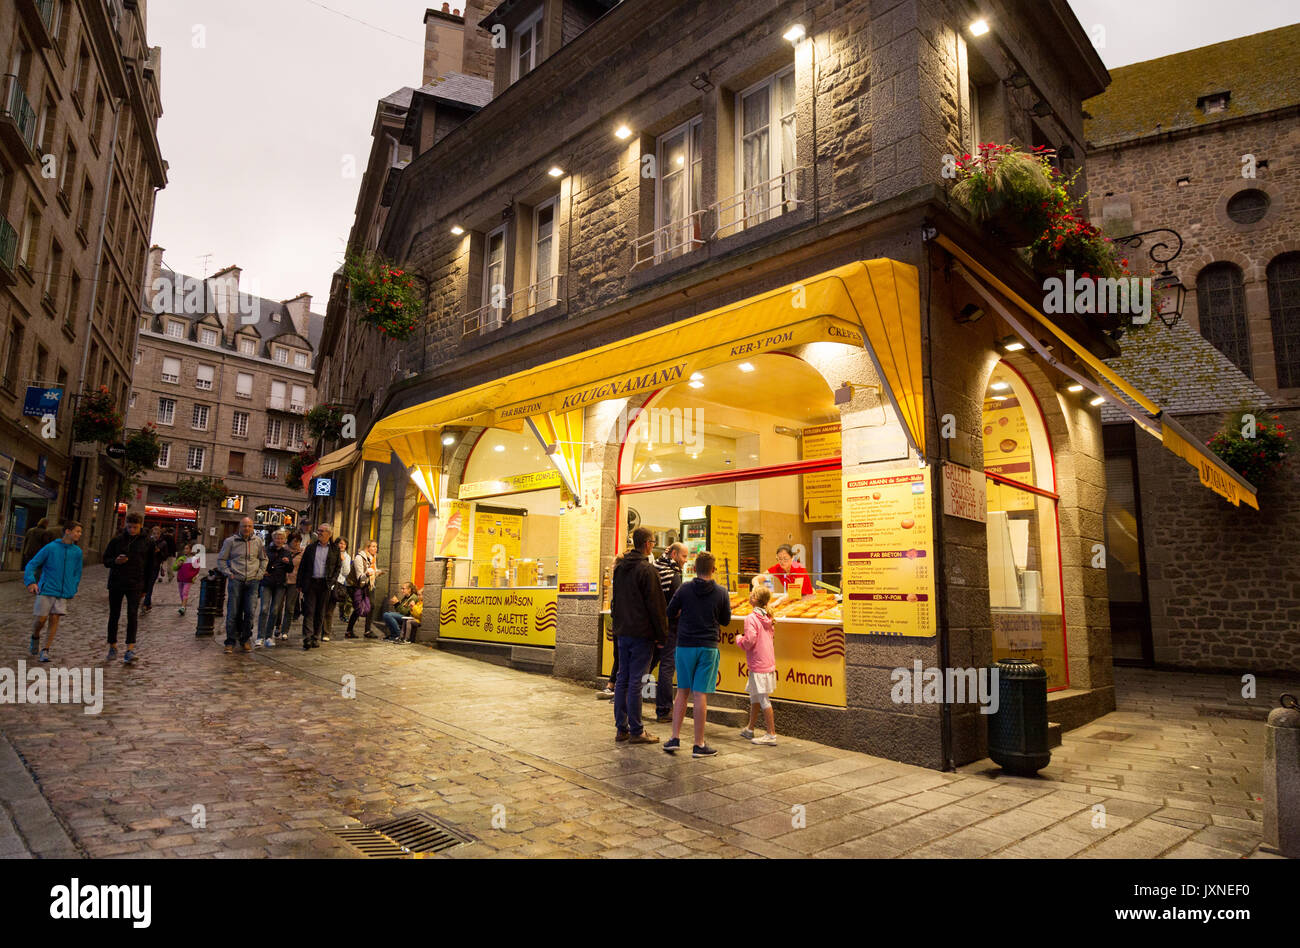 St Malo France - people at a french cafe in the  walled town at dusk, Saint Malo, old town, Brittany France Stock Photo